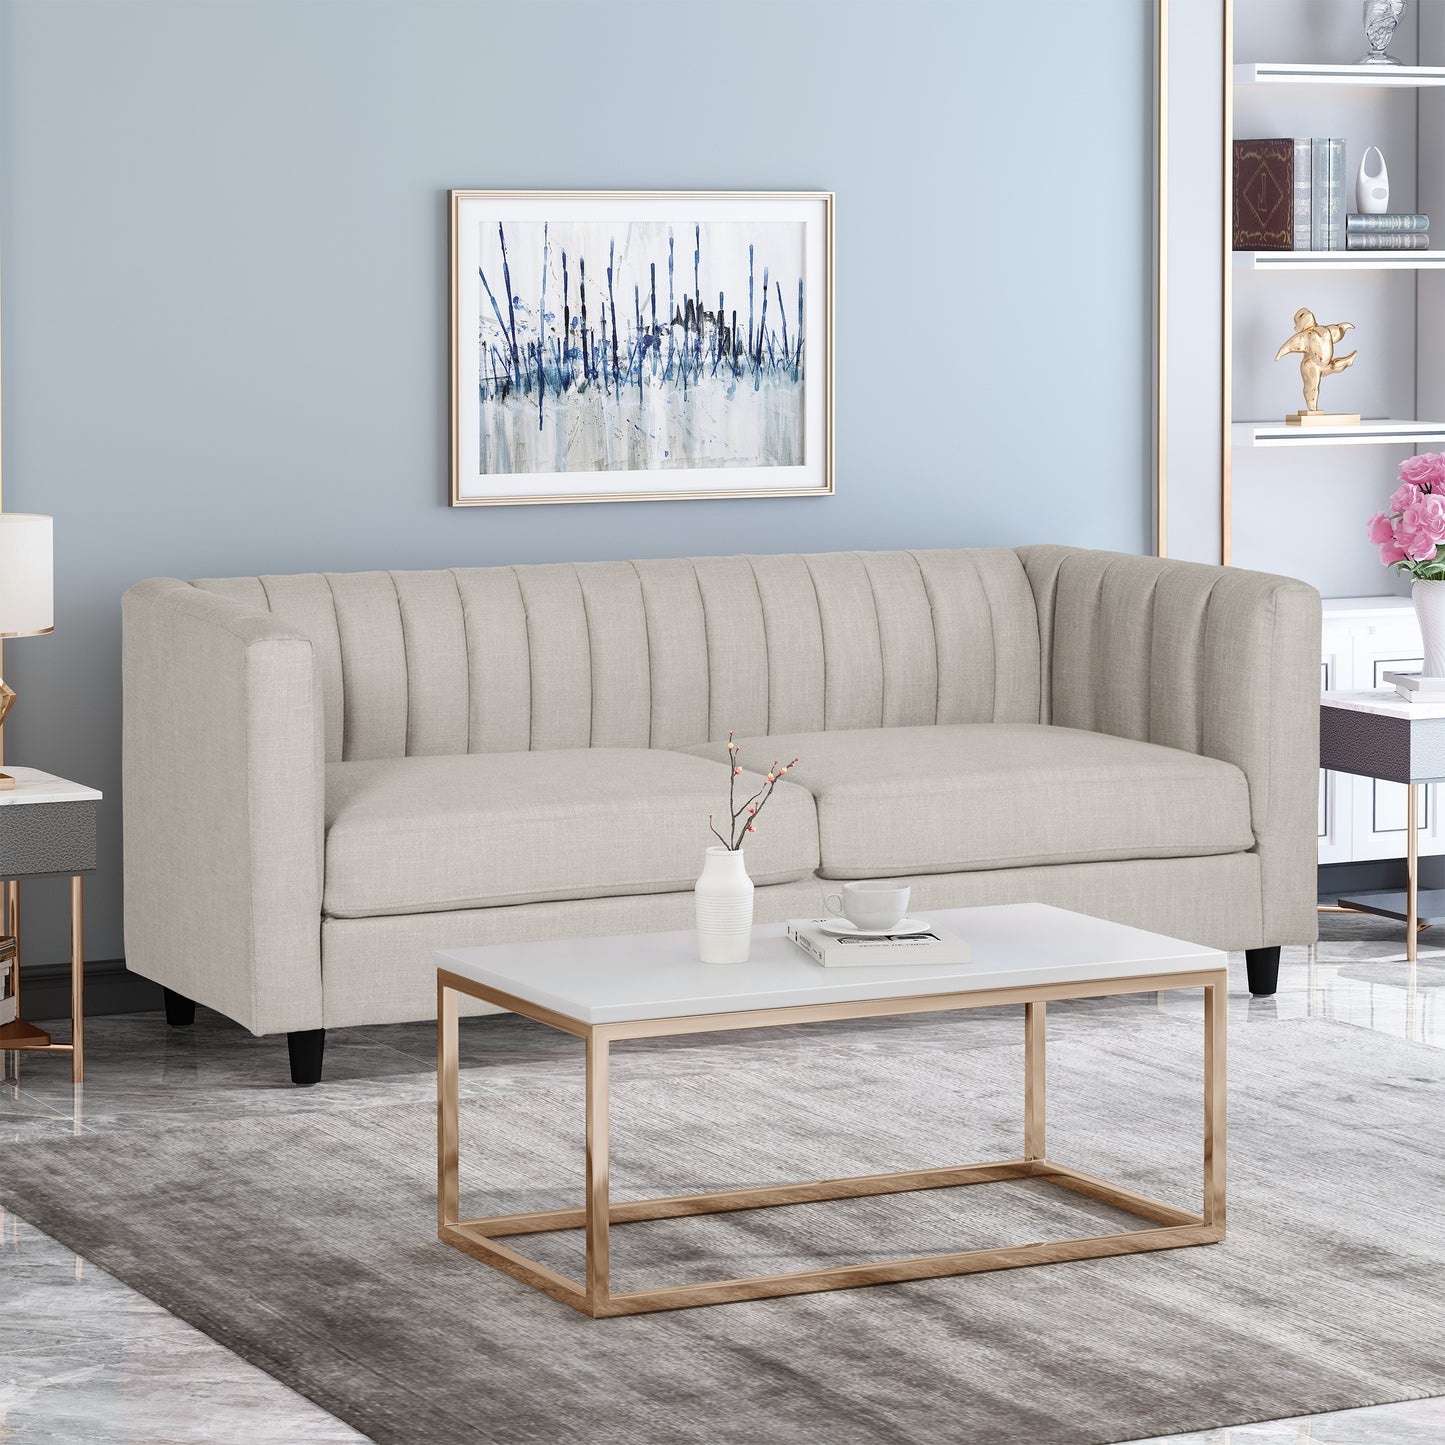 Darlin Contemporary Channel Stitched Fabric 3 Seater Sofa